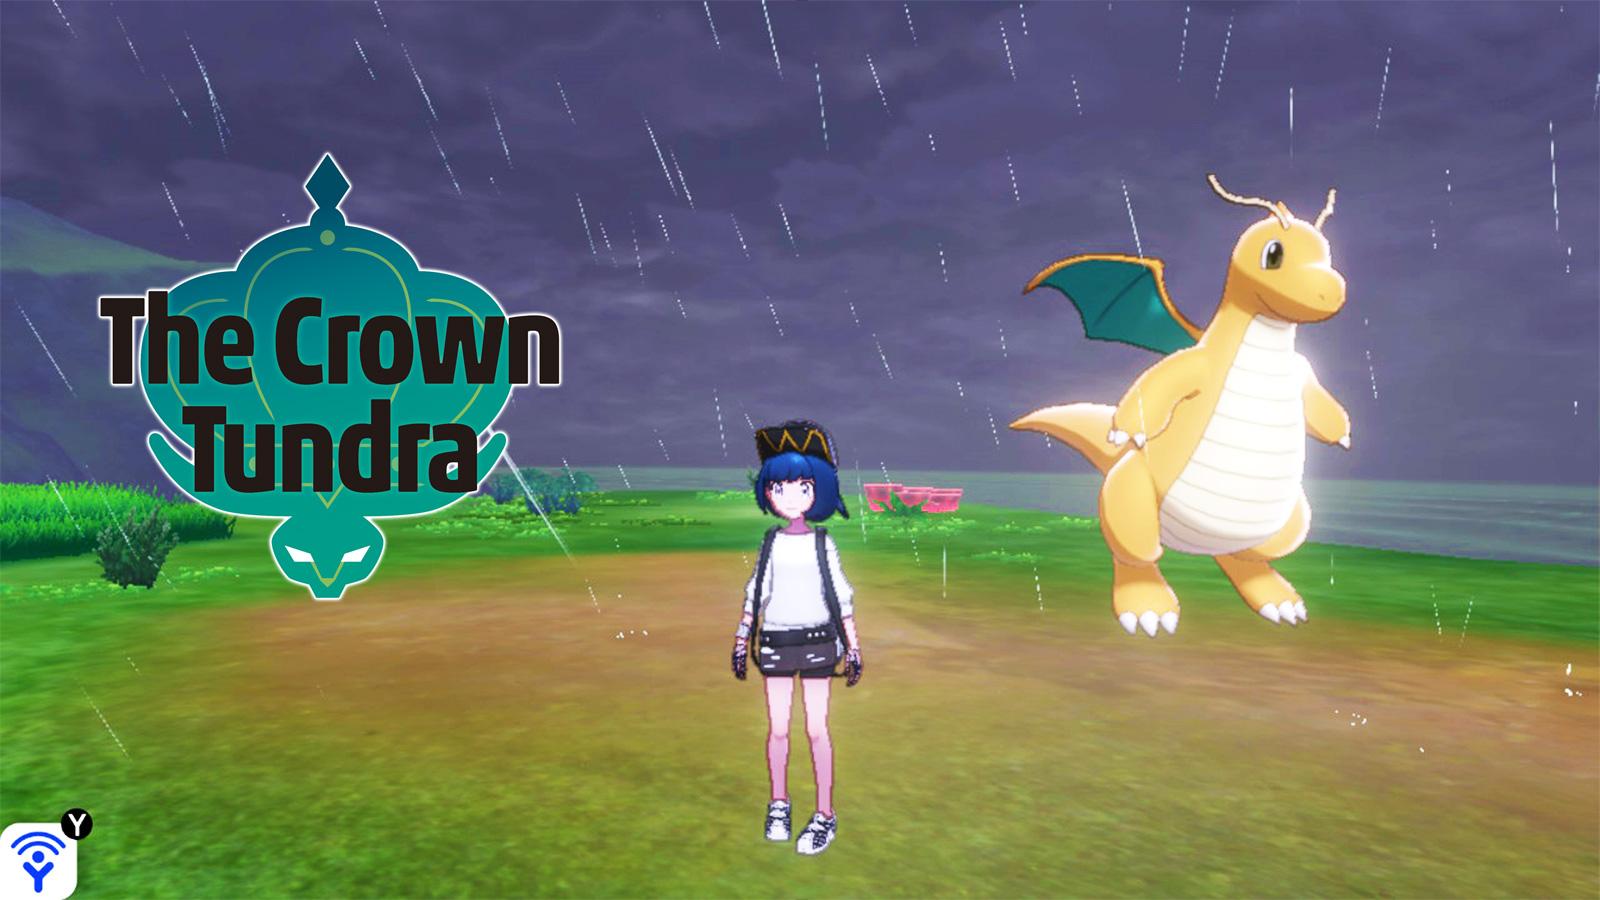 Pokémon Sword and Shield: How to Catch Spiritomb in the Crown Tundra